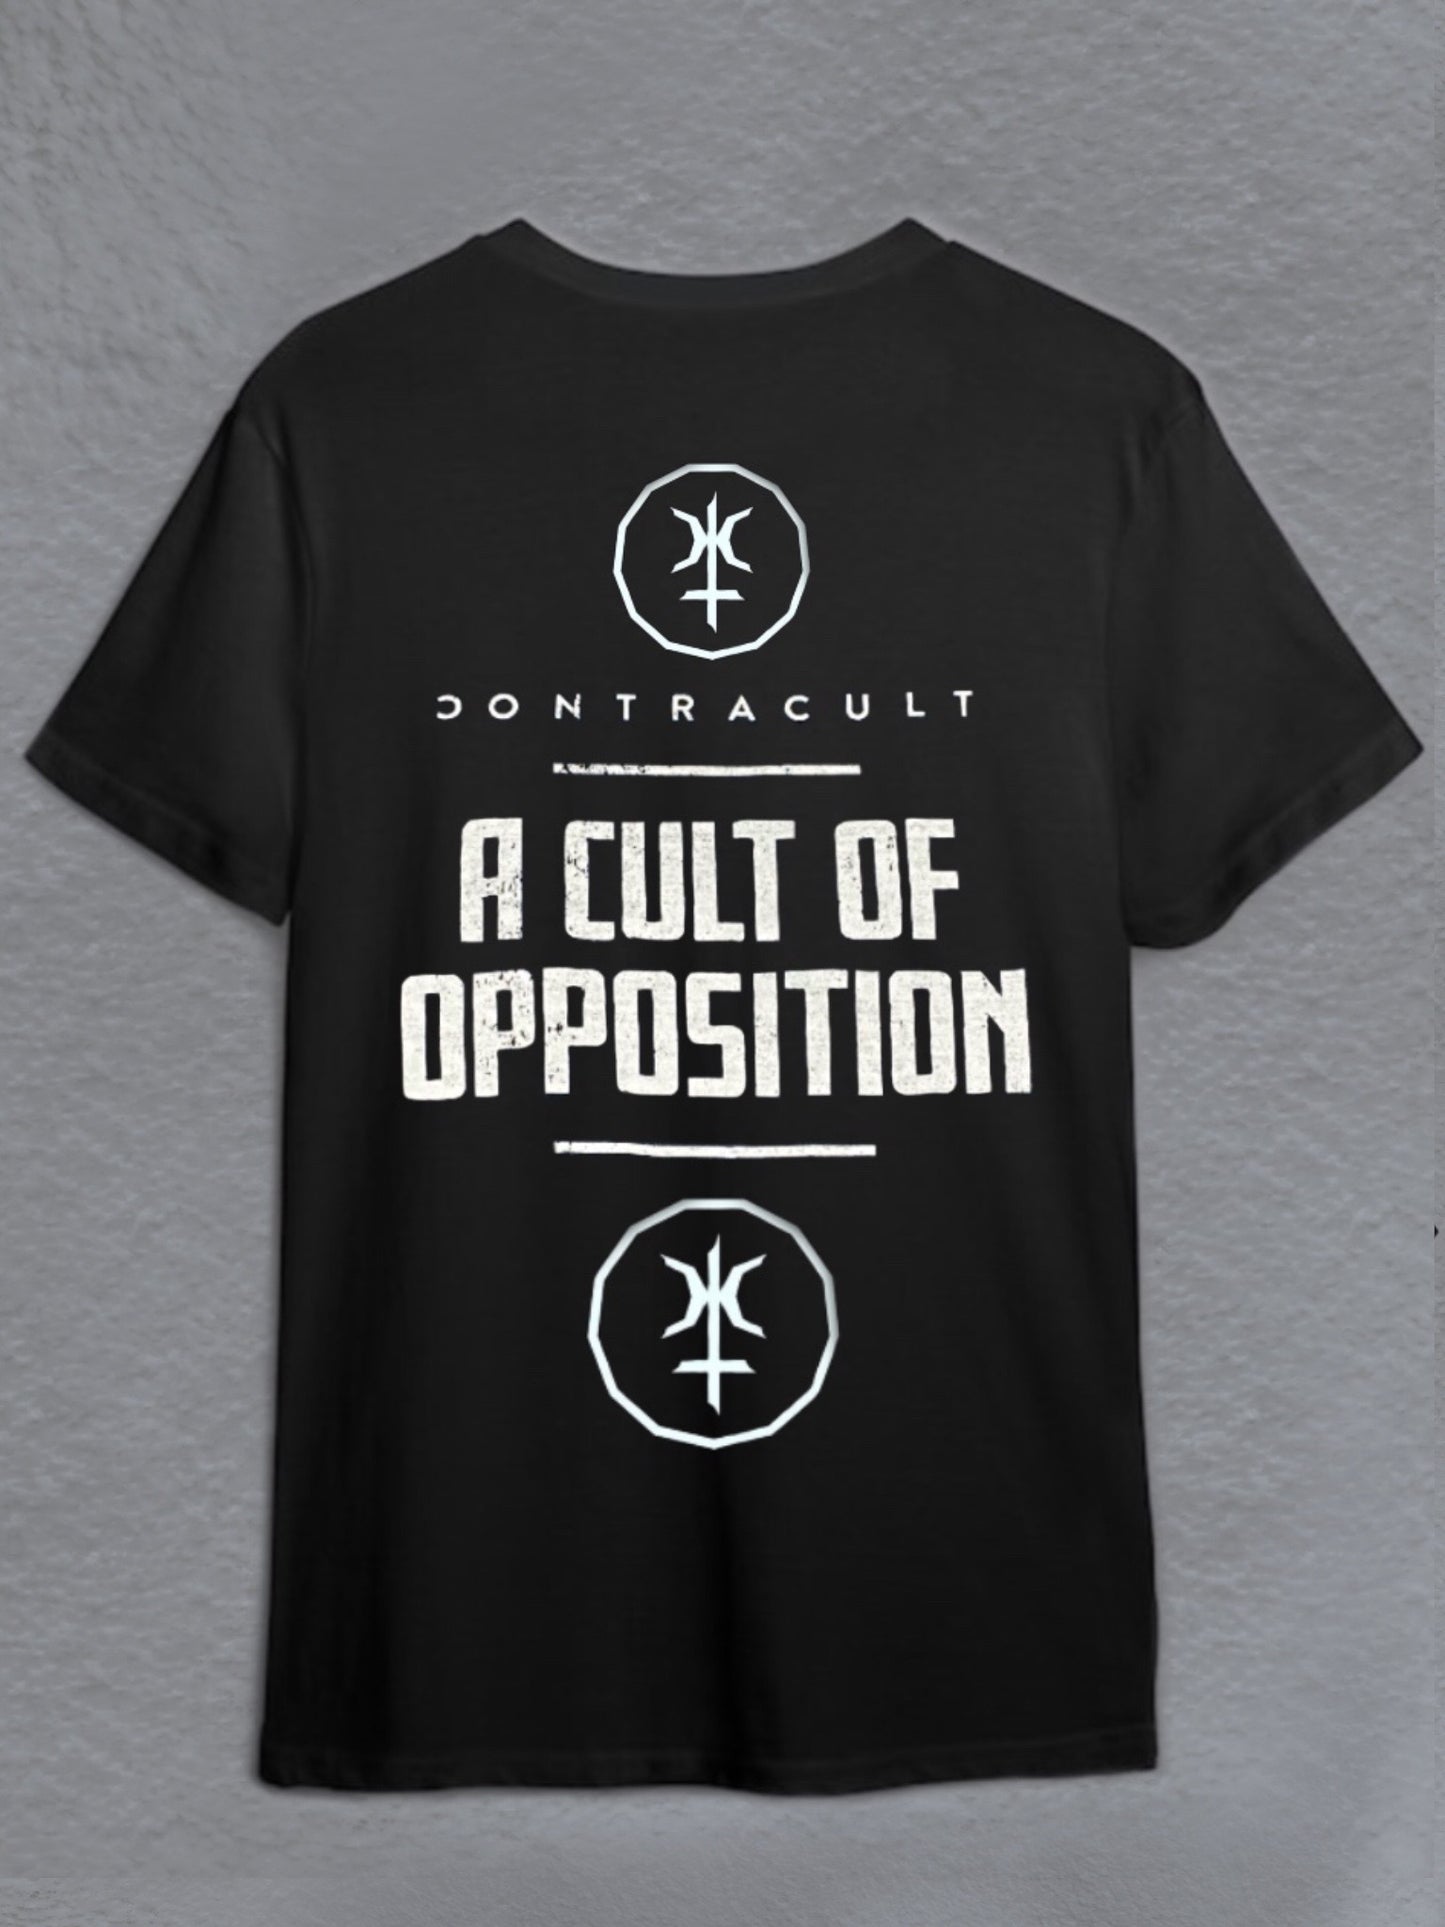 CC "A Cult of Opposition" T-Shirt ( 2- sided)